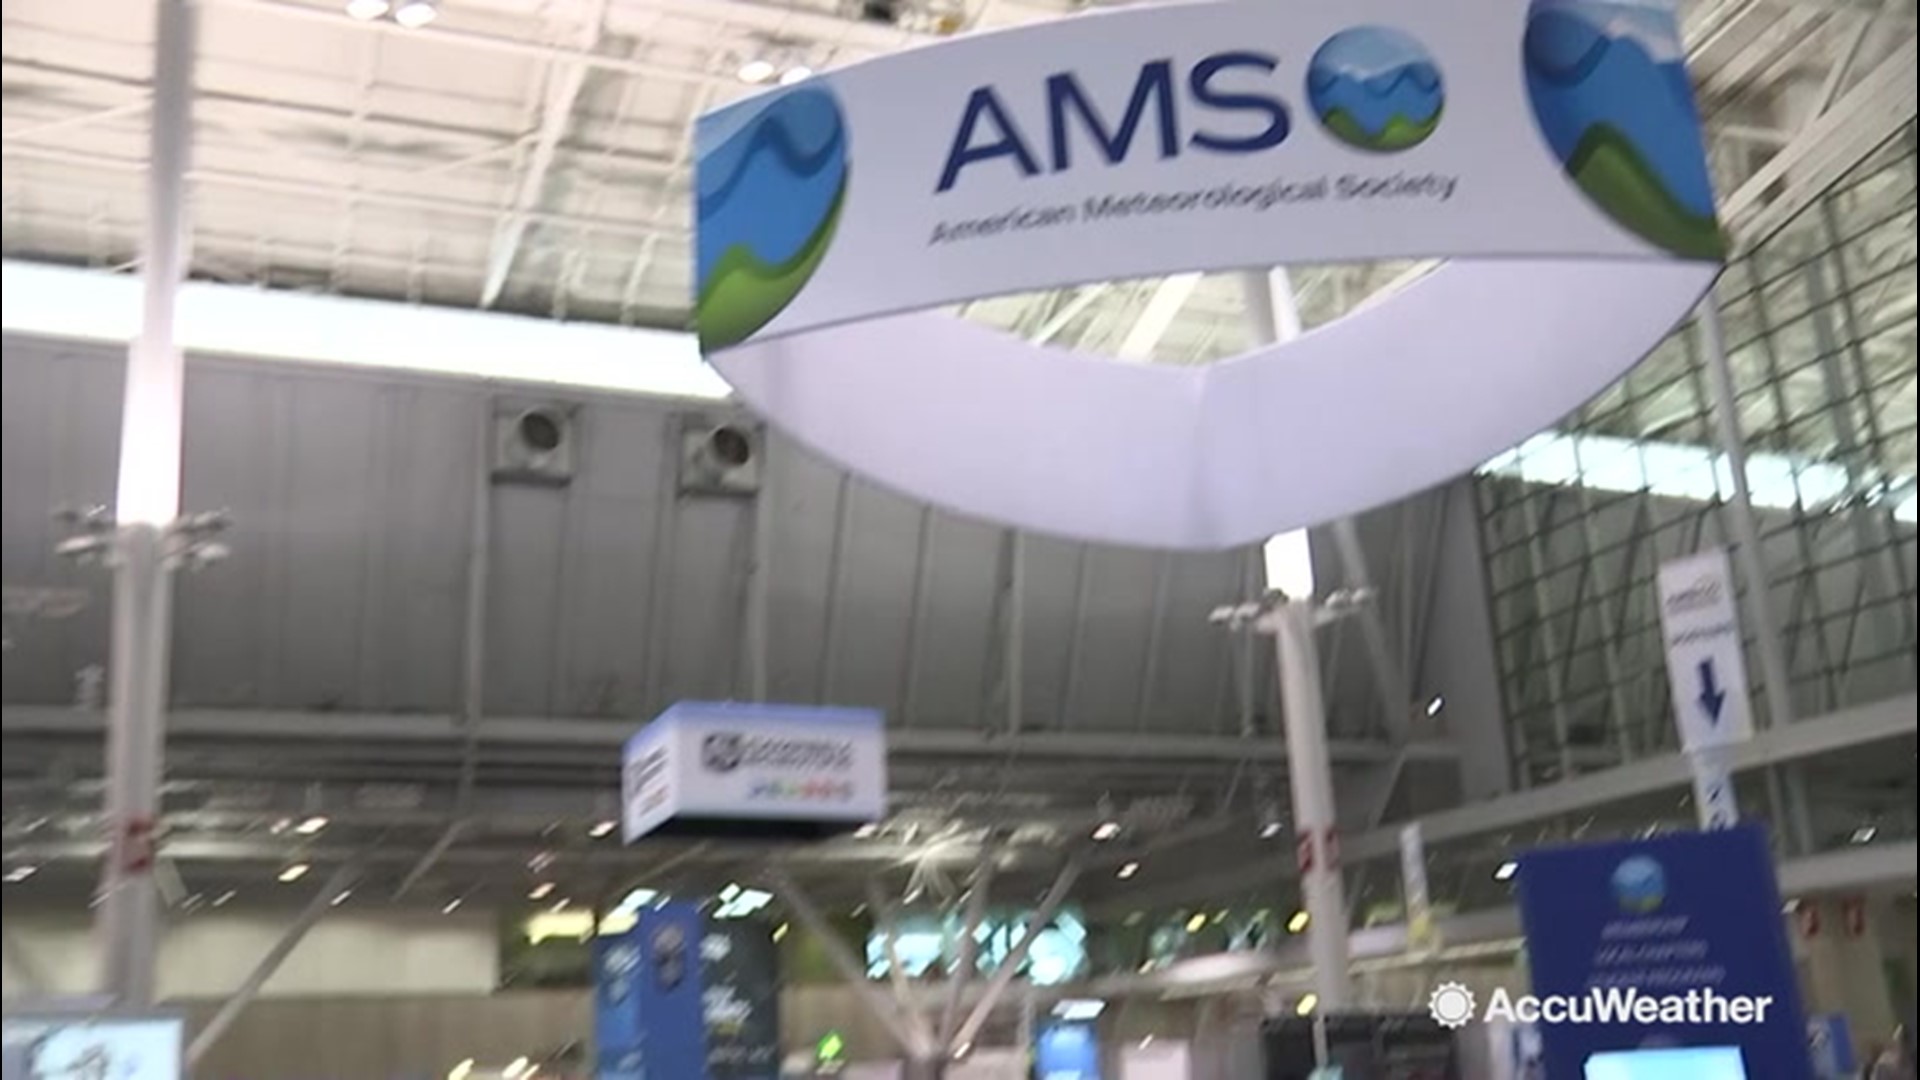 Thousands in attendance for the American Meteorological Society's 100th annual conference in Boston. Meteorologists Mark Mancuso and Cheryl Nelson discuss.